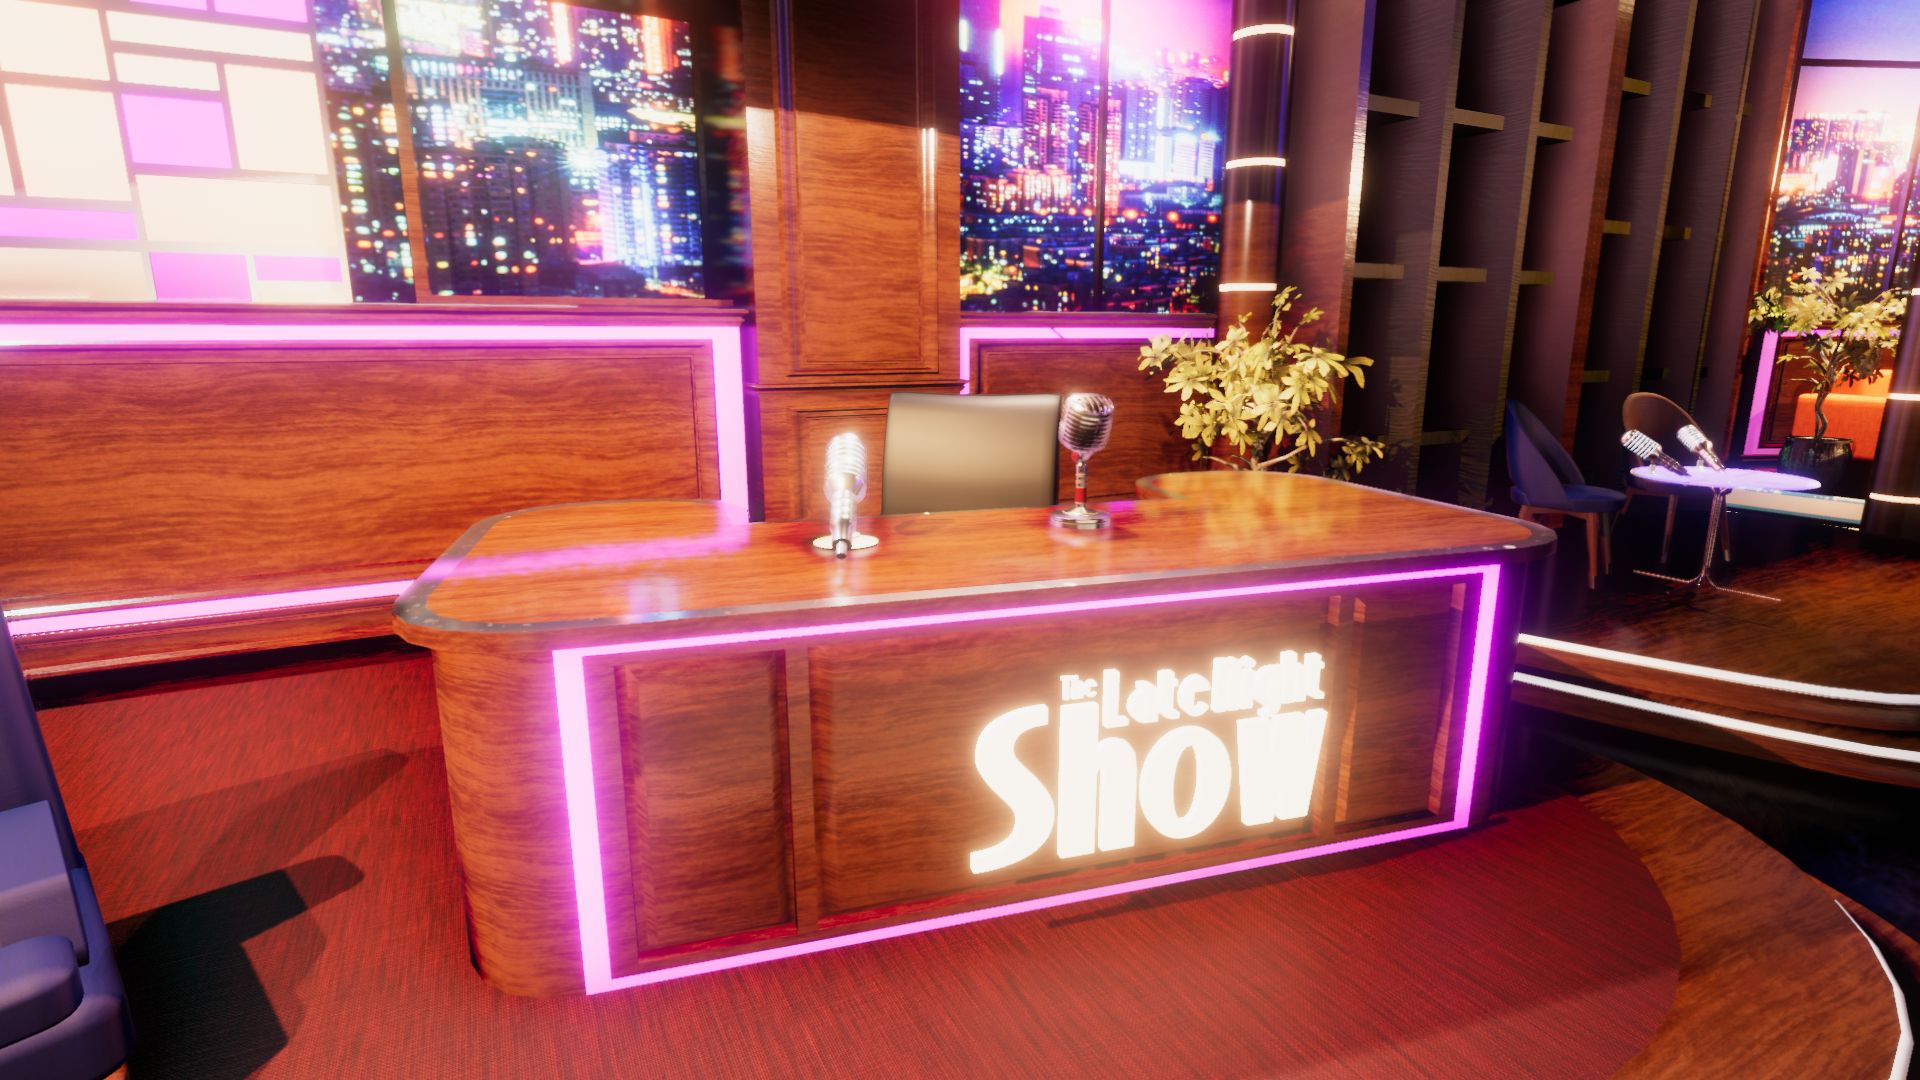 An image showing Late Night Show asset pack, created with Unity Engine.